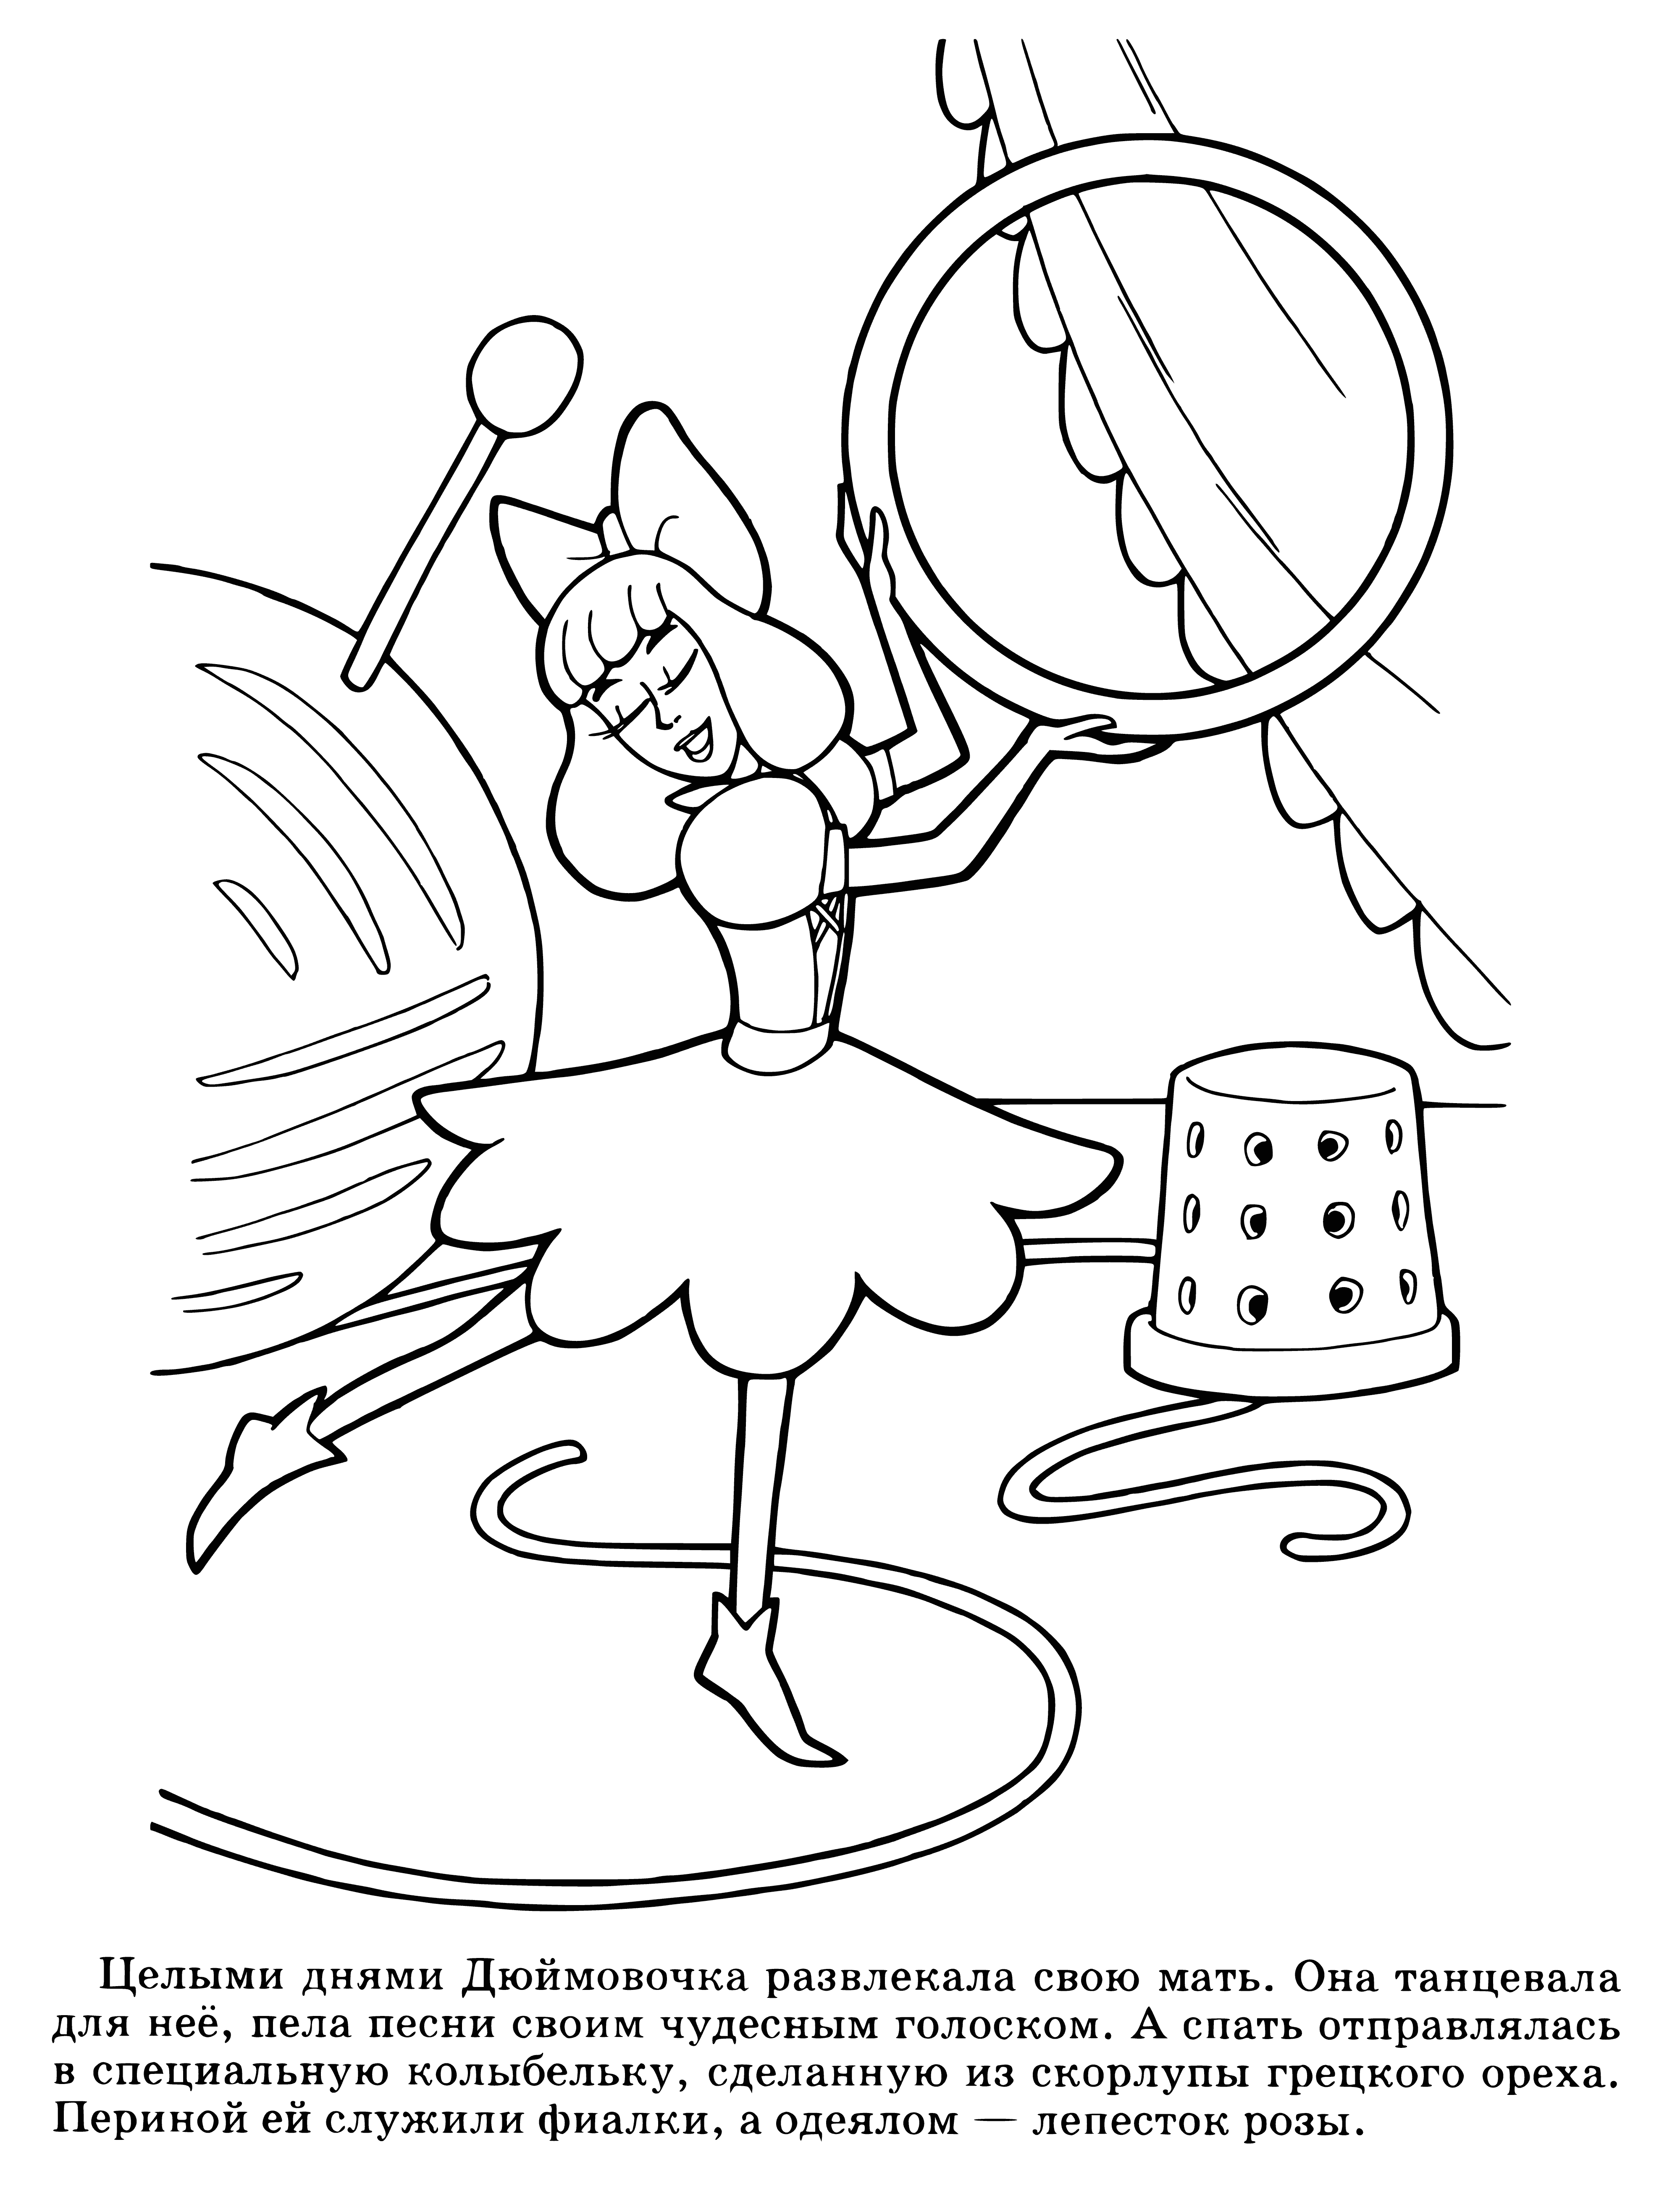 coloring page: A young girl in a pink dress dances in a meadow while surrounded by buzzing bees & butterflies, her wings twinkle in the sunshine.